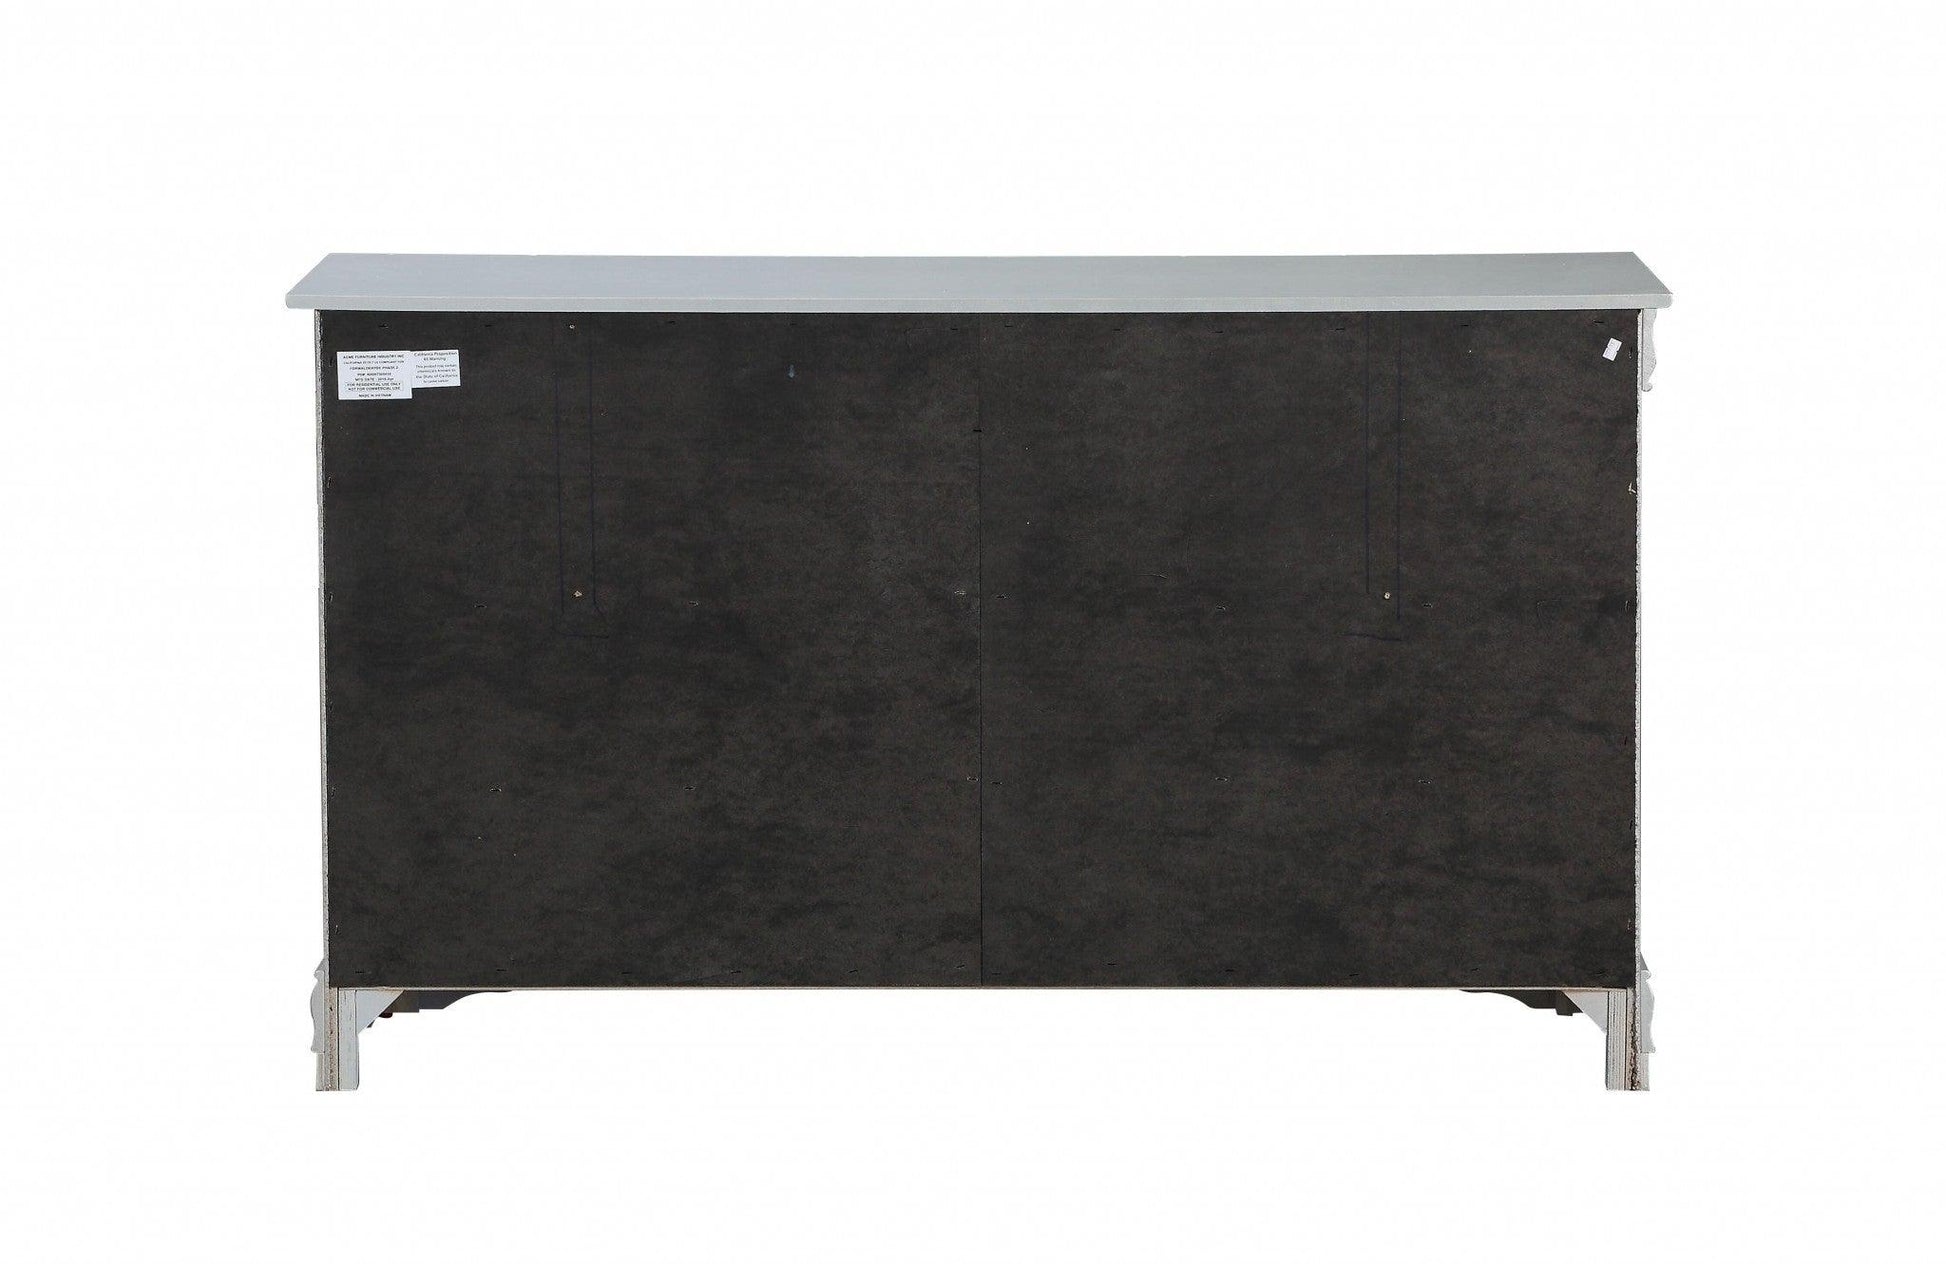 18" Gray Solid Wood Double Dresser - FurniFindUSA